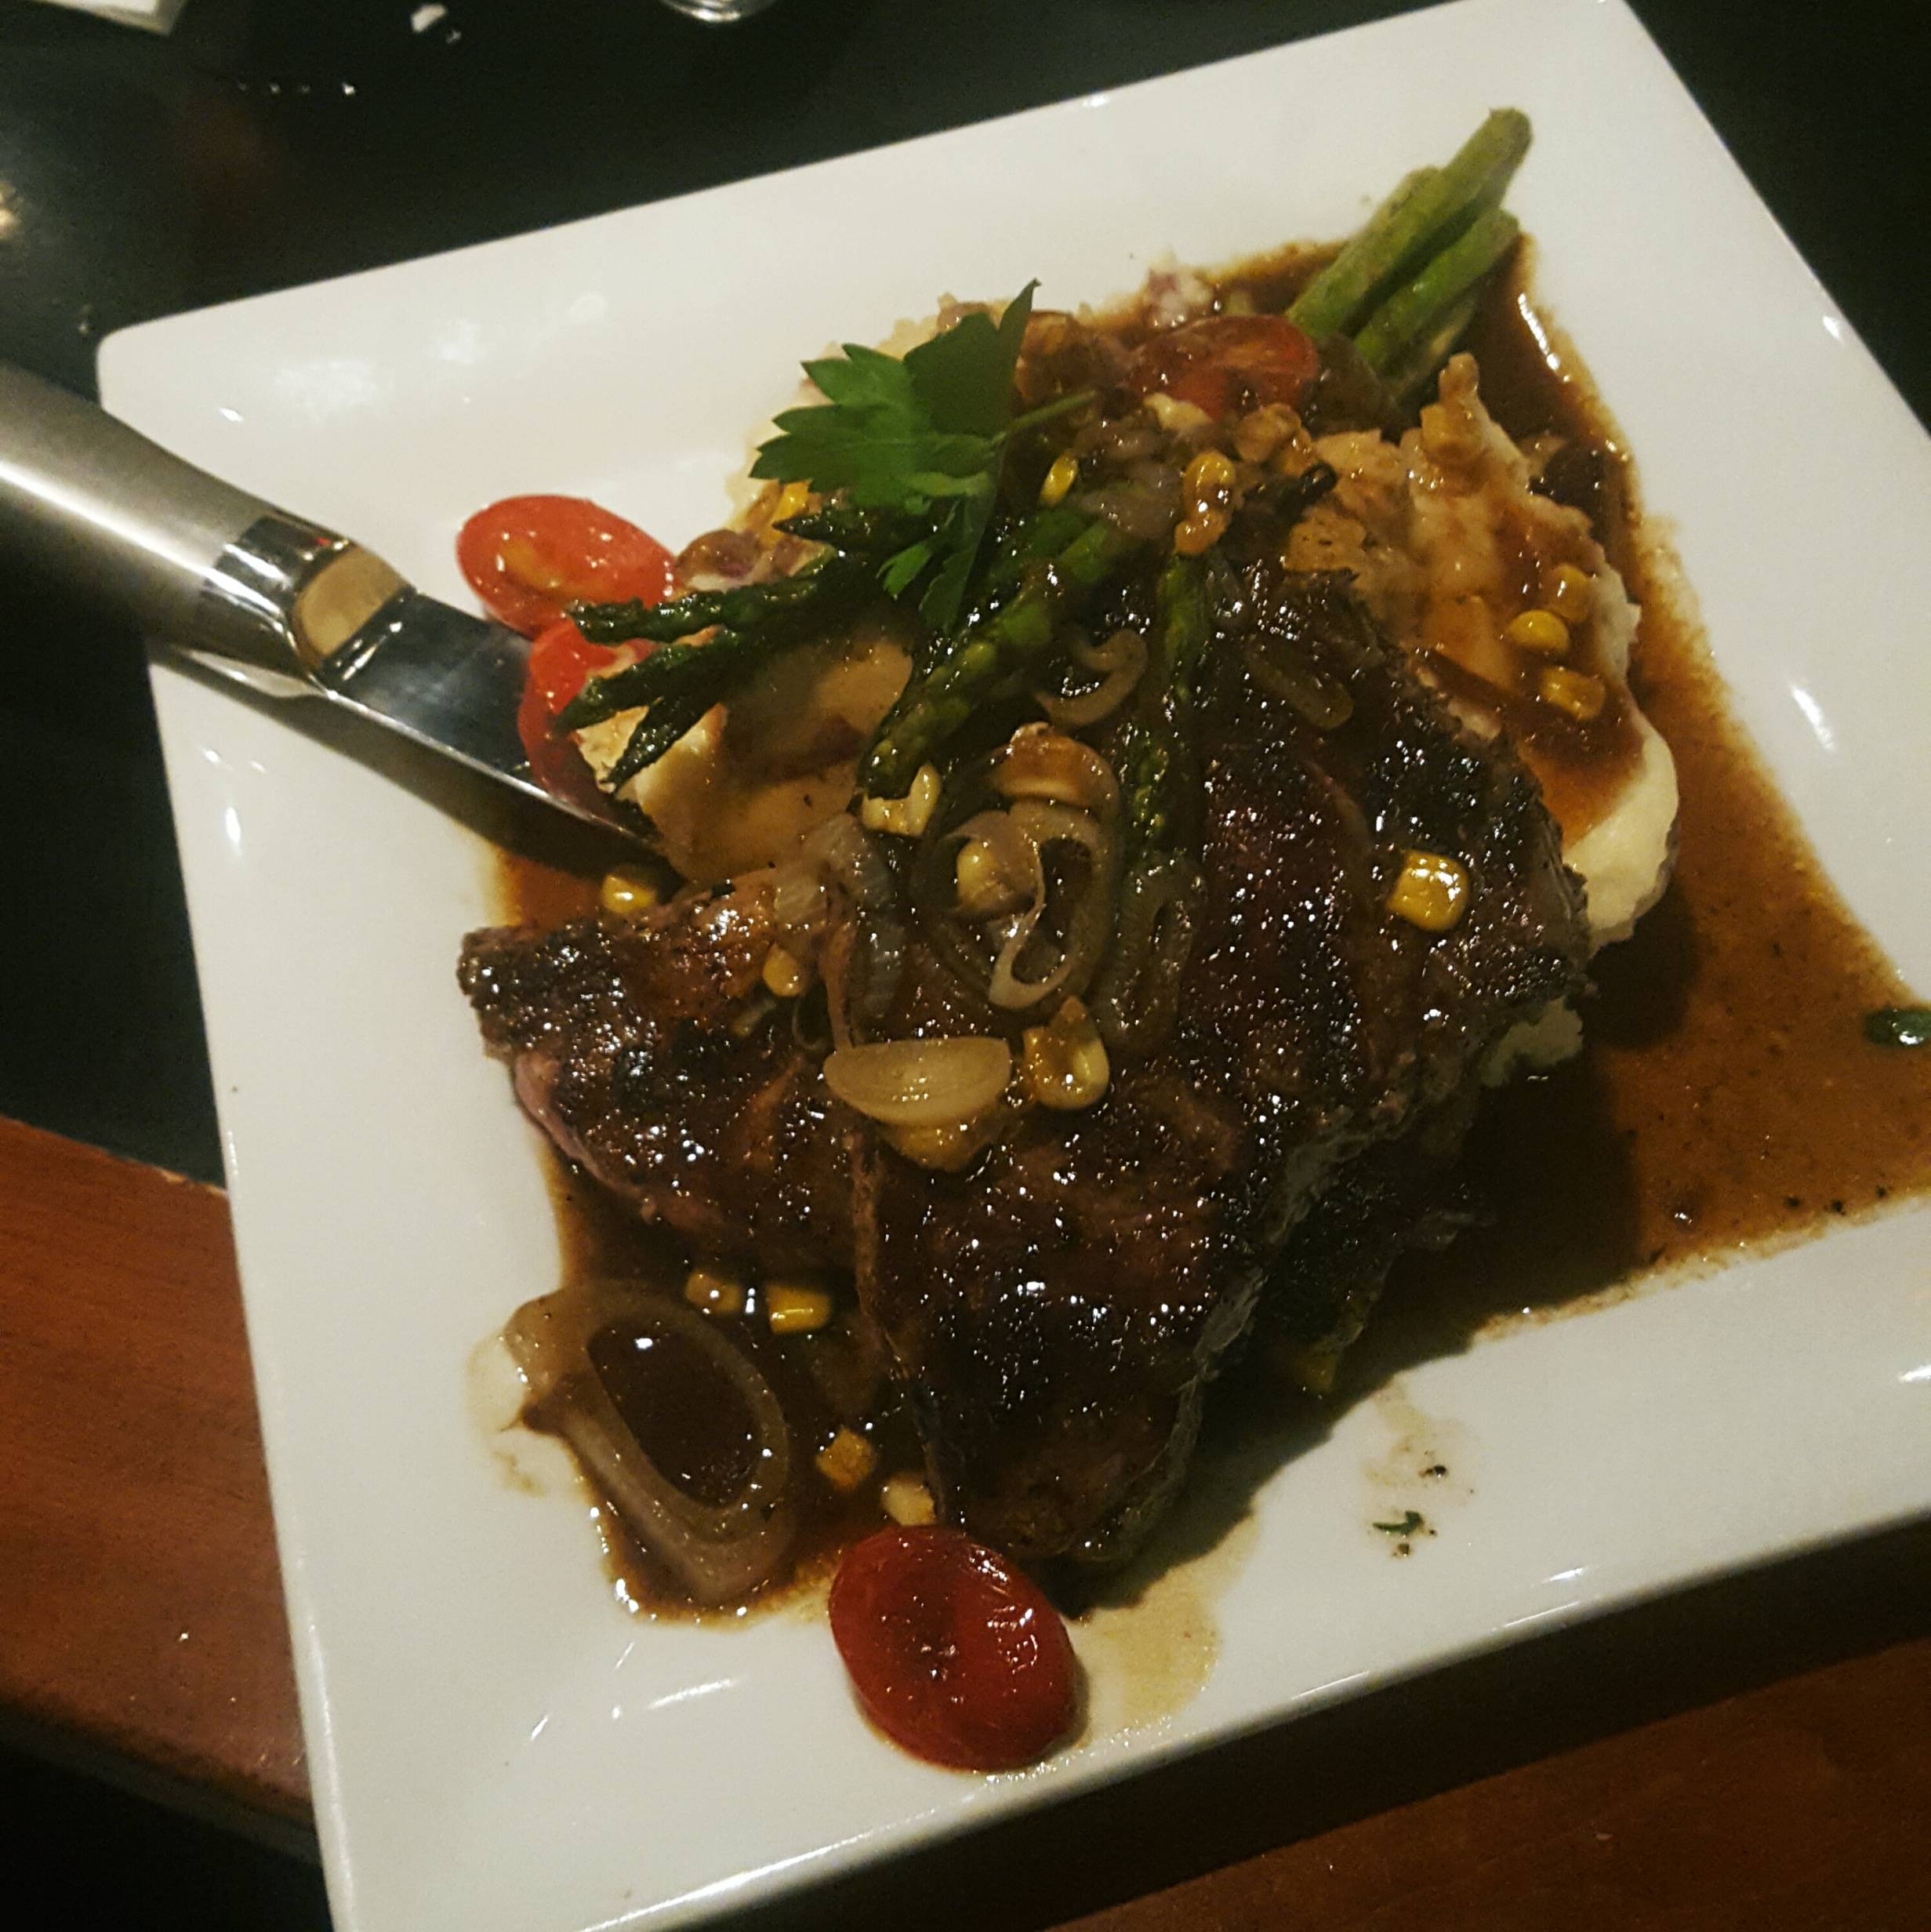 Baxter’s American Grille has your steak